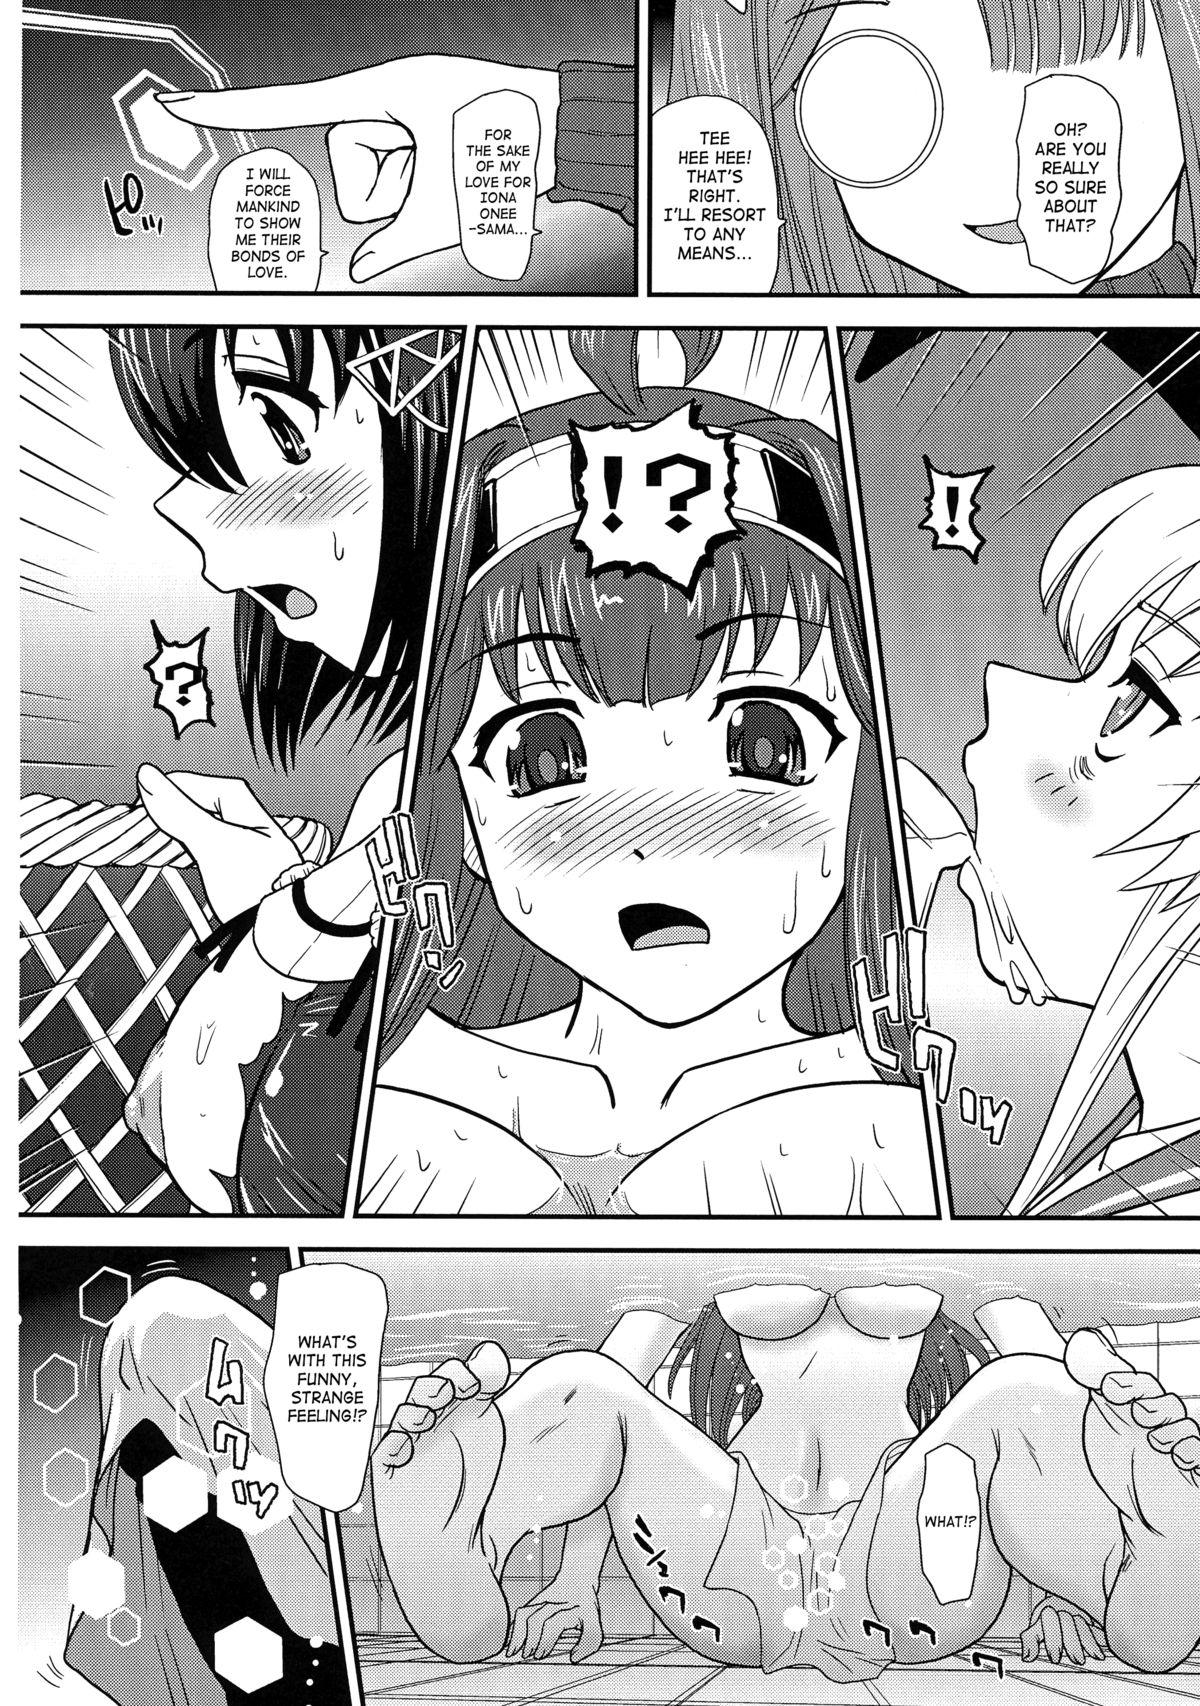 Soapy Chinshufu!! - Kantai collection Arpeggio of blue steel Massages - Page 6